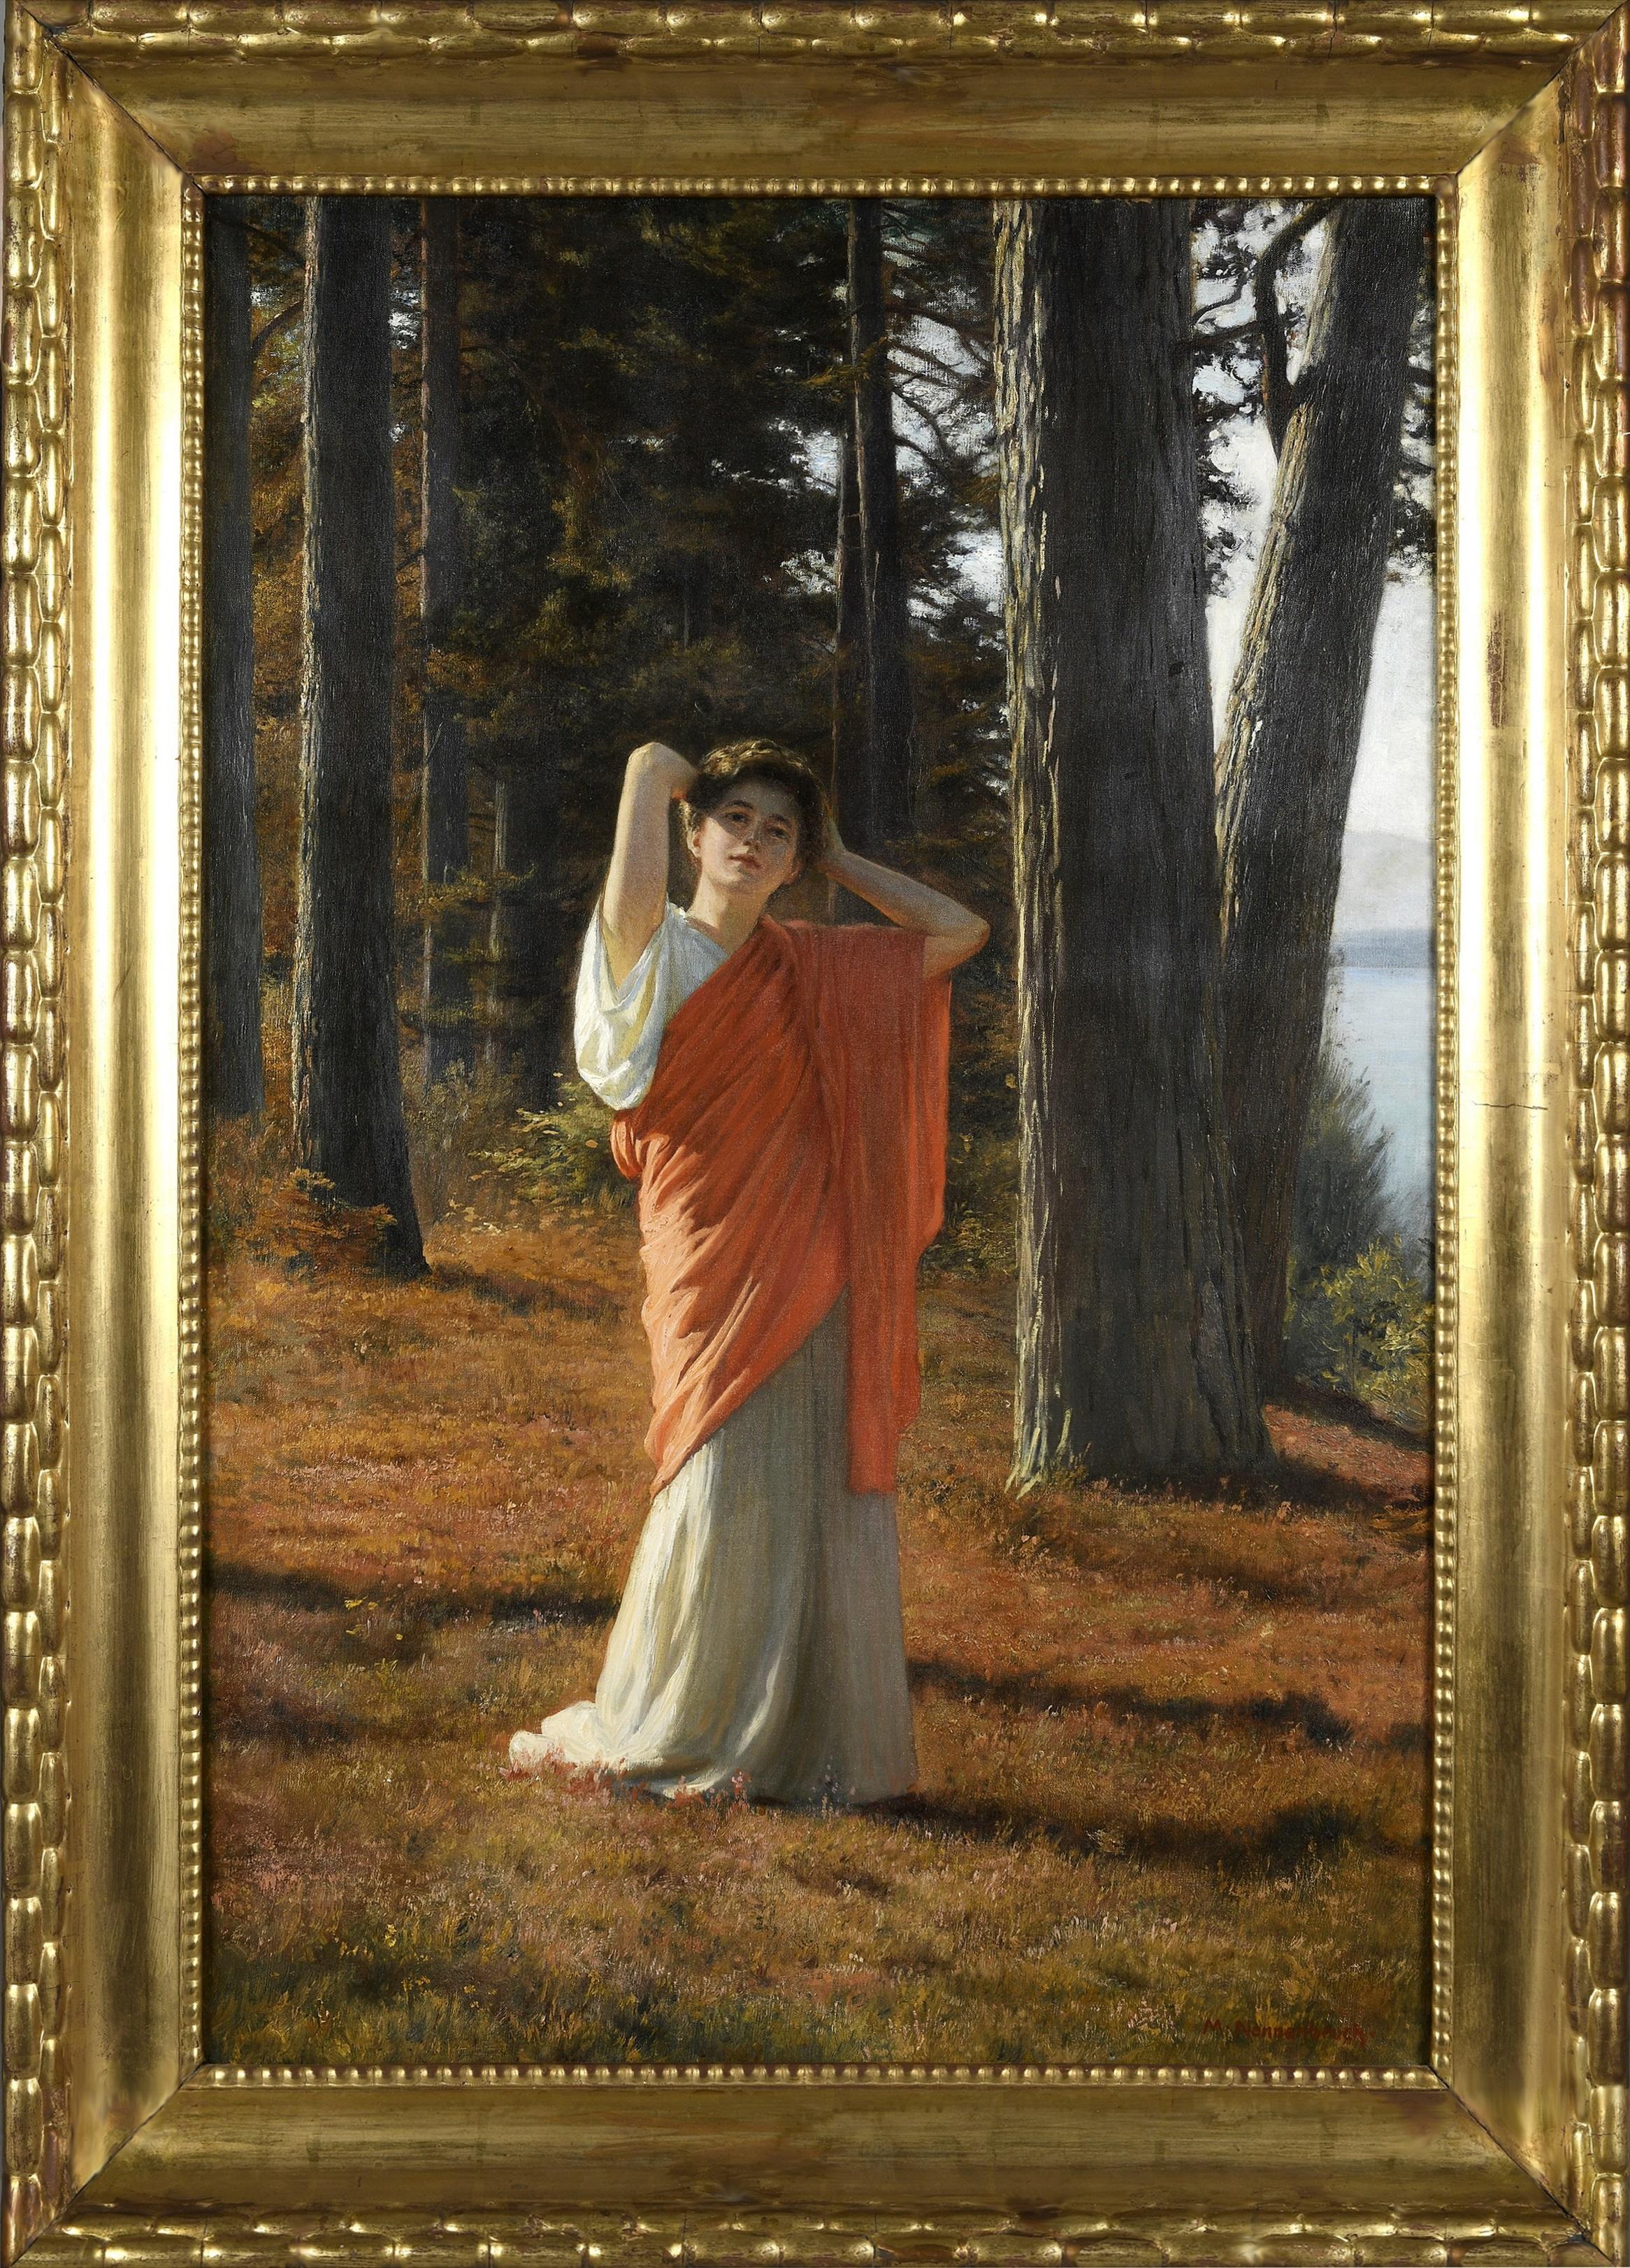 ‘Diana Nemorensis’ by Max Nonnenbruch (1857-1922).

The painting – which depicts the Goddess Diana of the Woods beside Lake Nemi – is signed by the artist and presented in a fine gold leaf neoclassical frame.

The scared temple of Diana Nemorensis